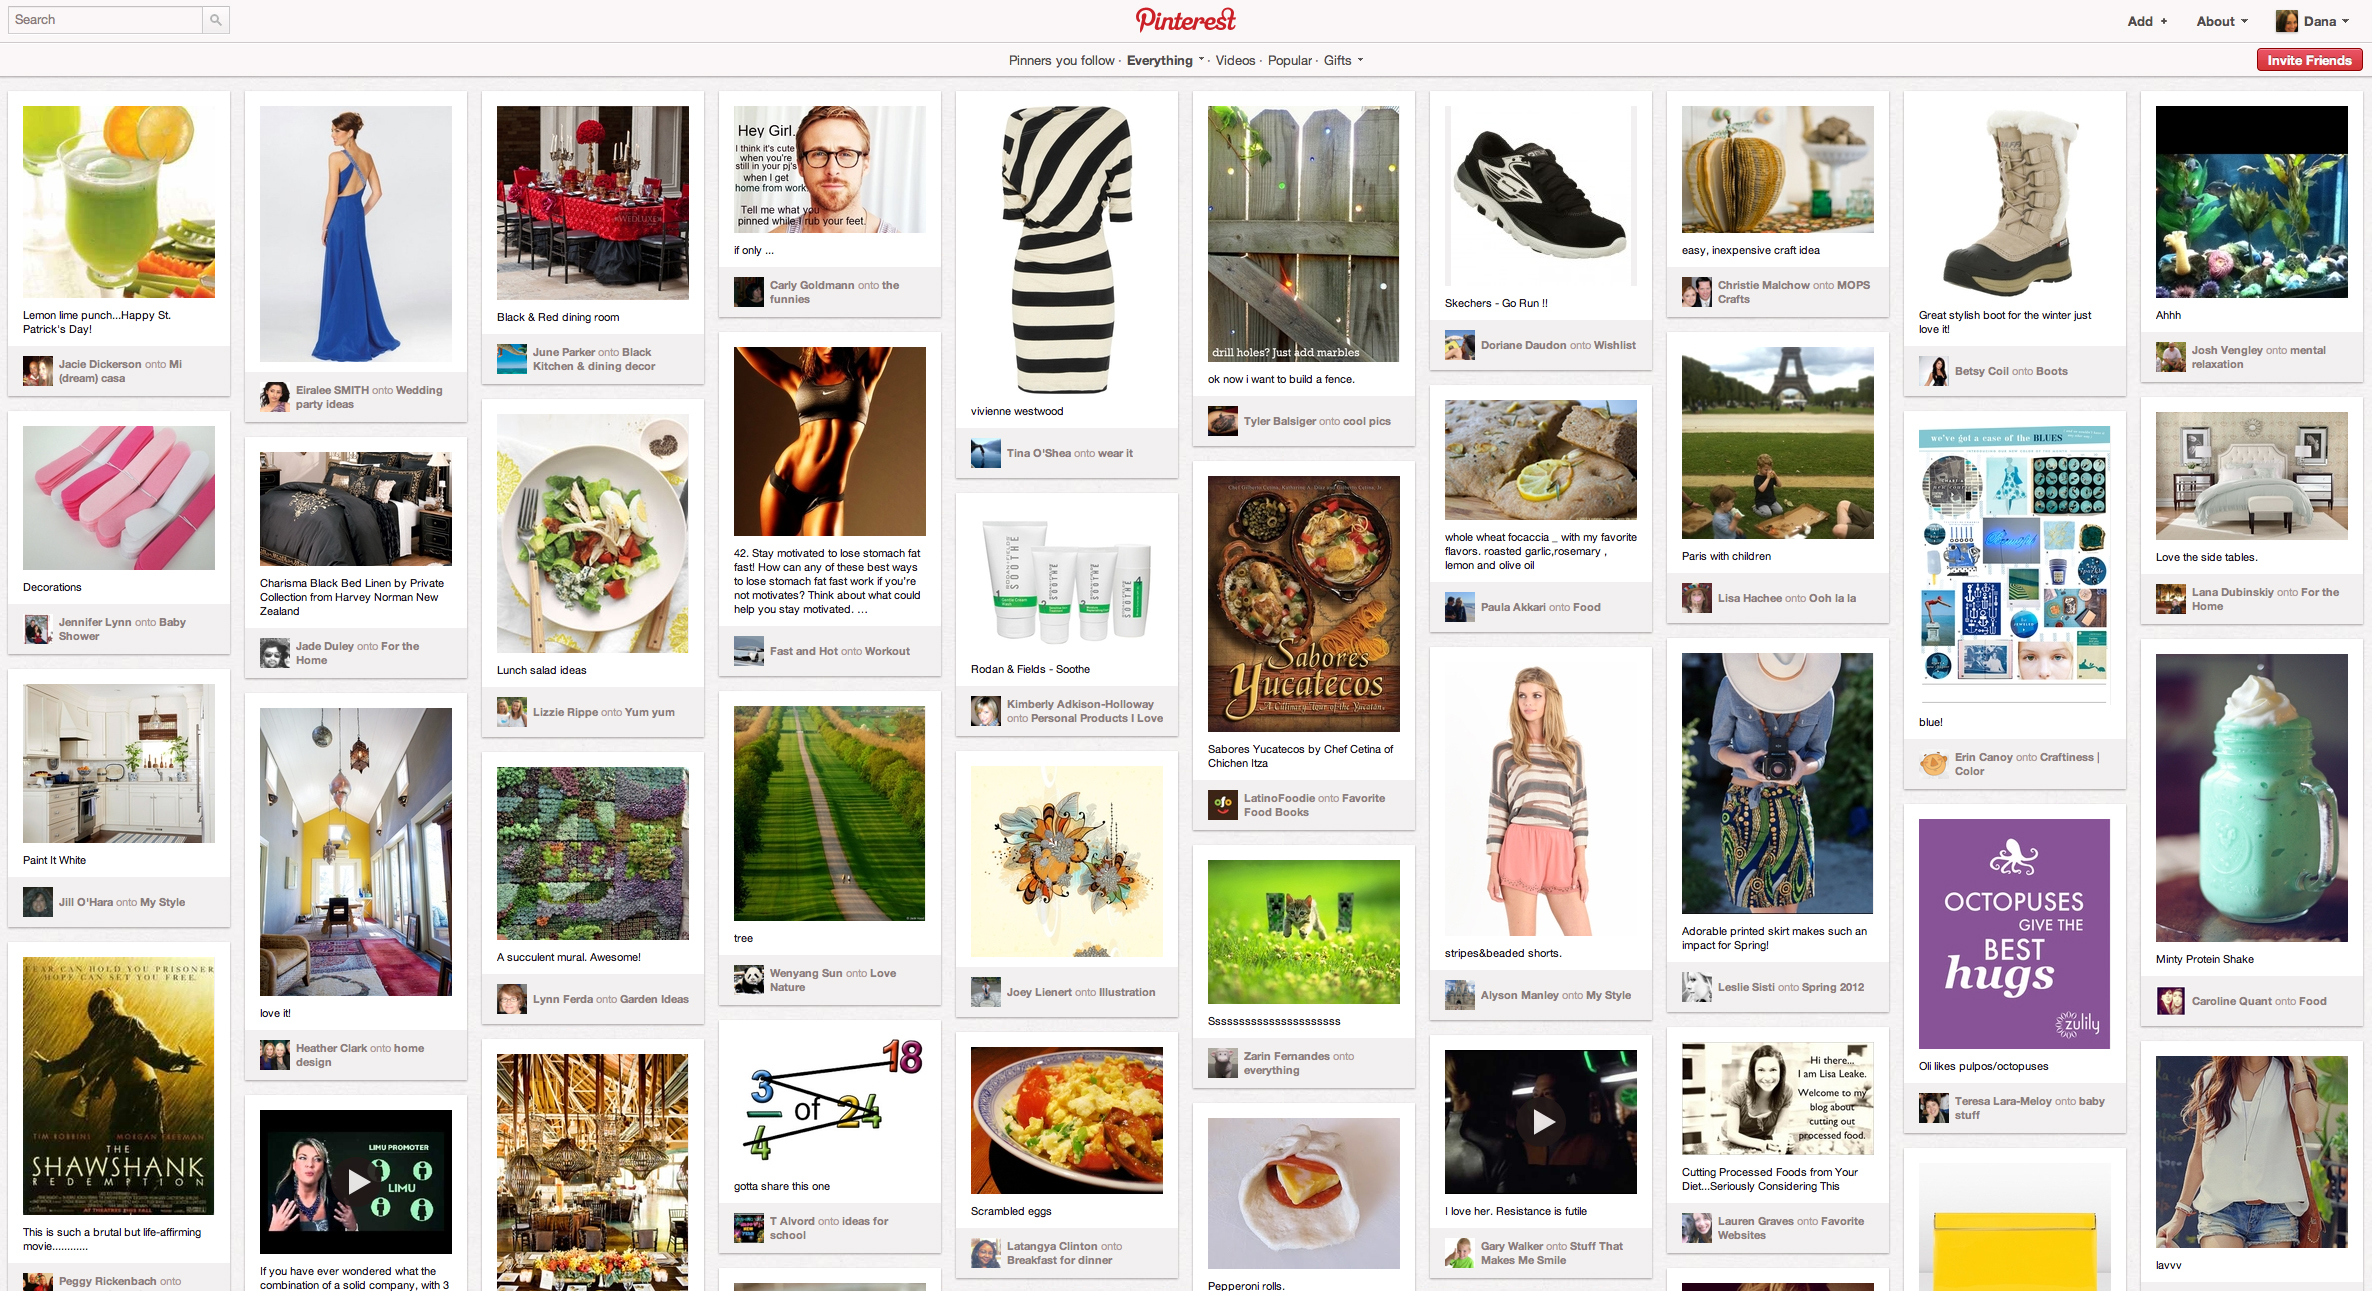  Pinterest  Adds Features as It Looks to Monetize 55 Million 